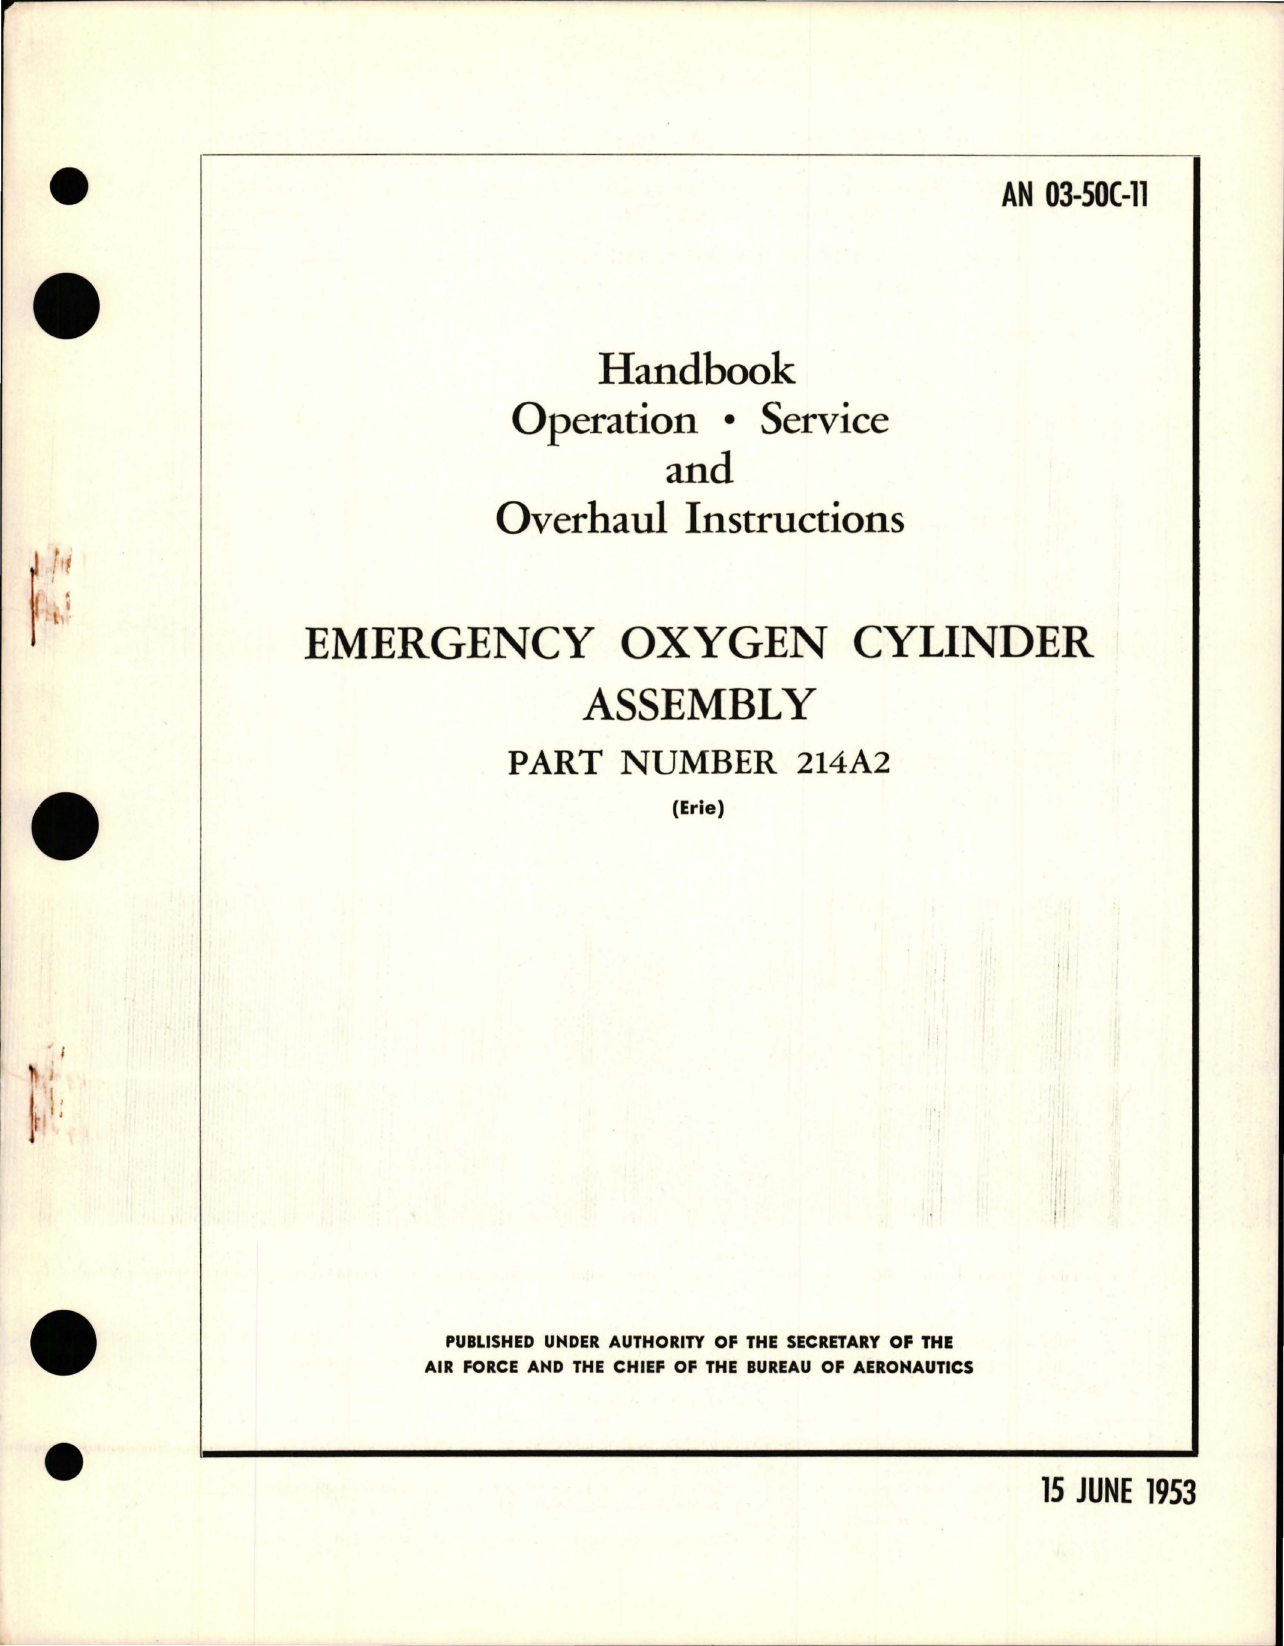 Sample page 1 from AirCorps Library document: Operation, Service, and Overhaul Instructions for Emergency Oxygen Cylinder Assembly - Part 214A2 